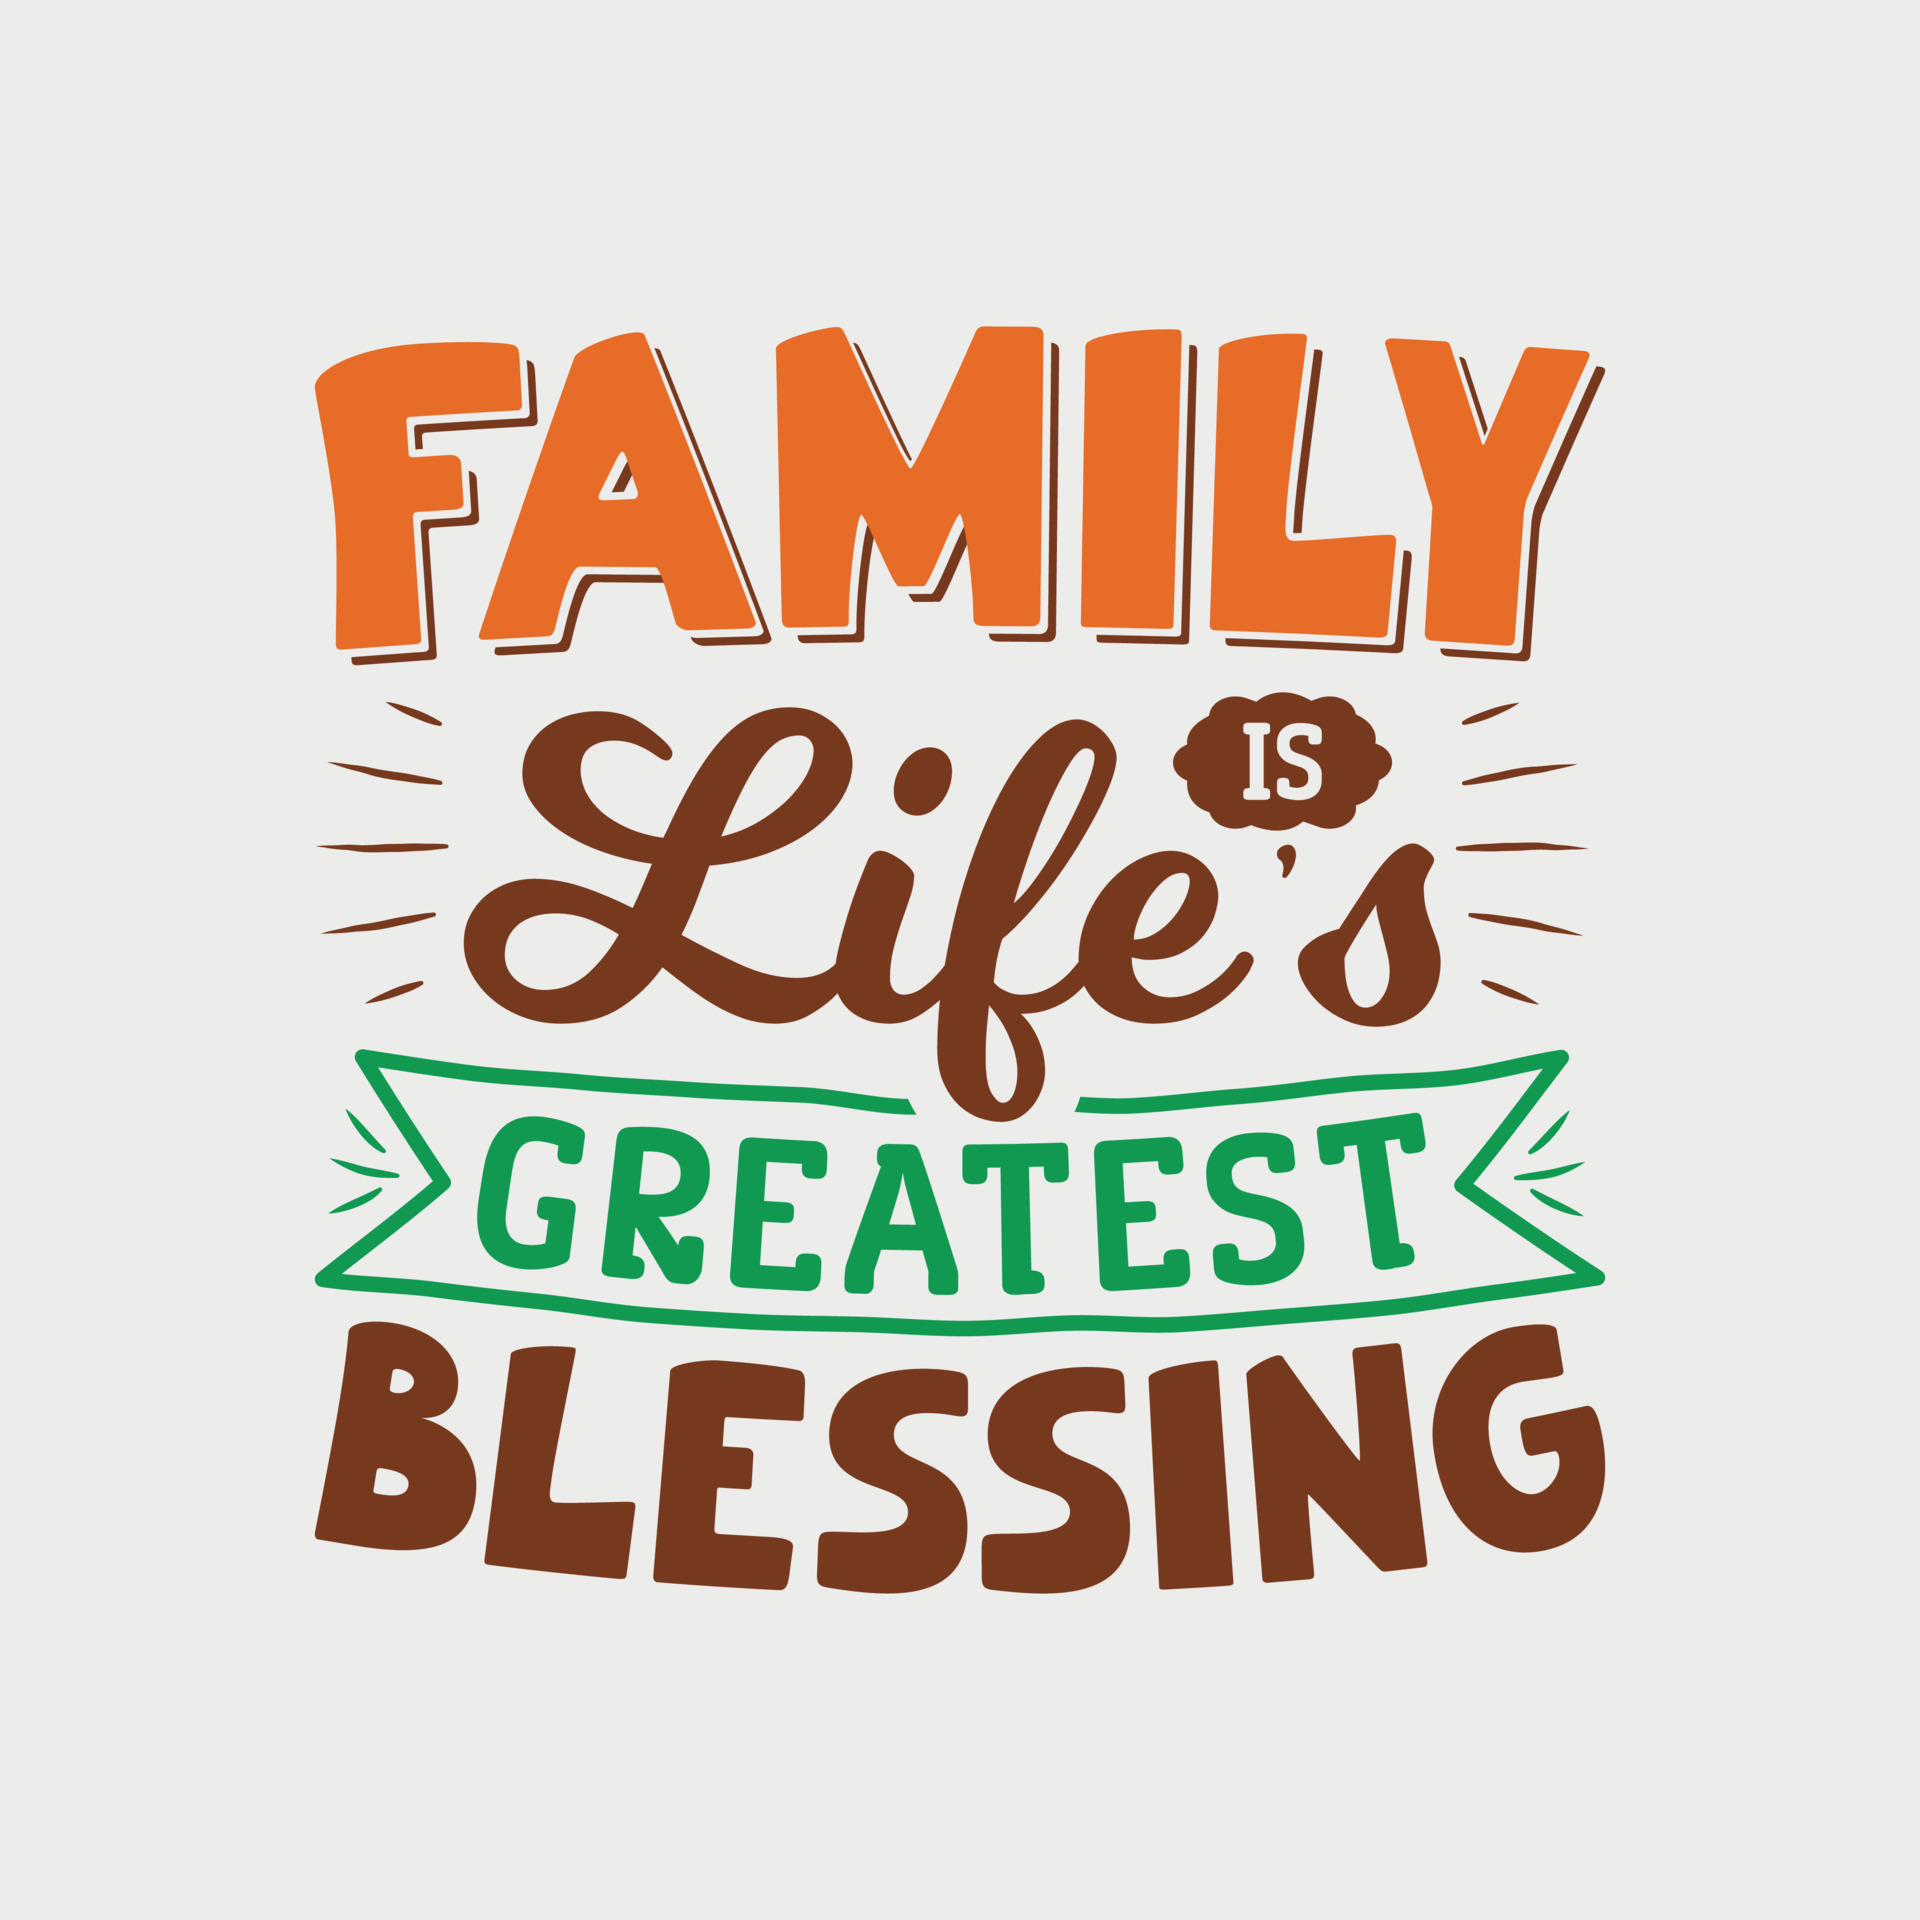 thanksgiving blessing a family